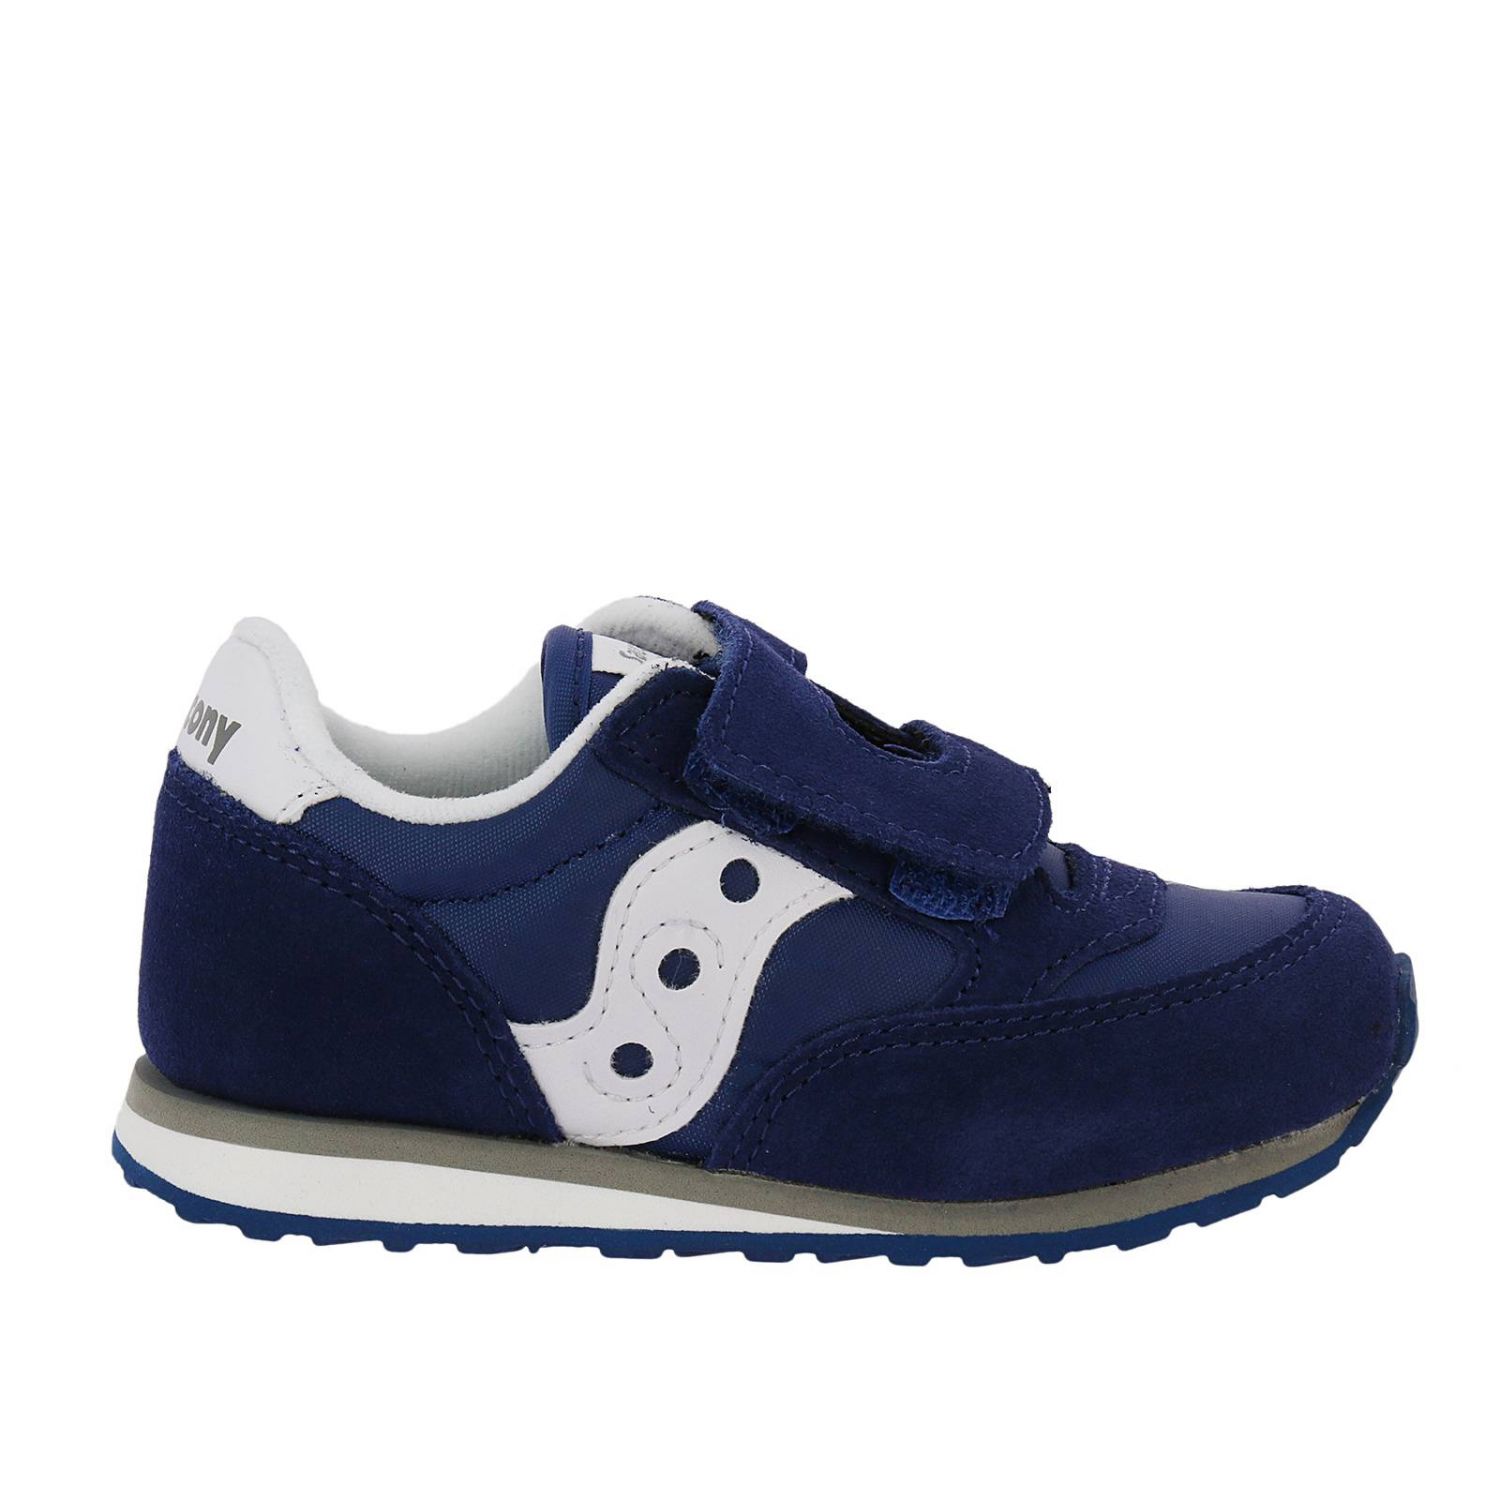 saucony shoes for kids